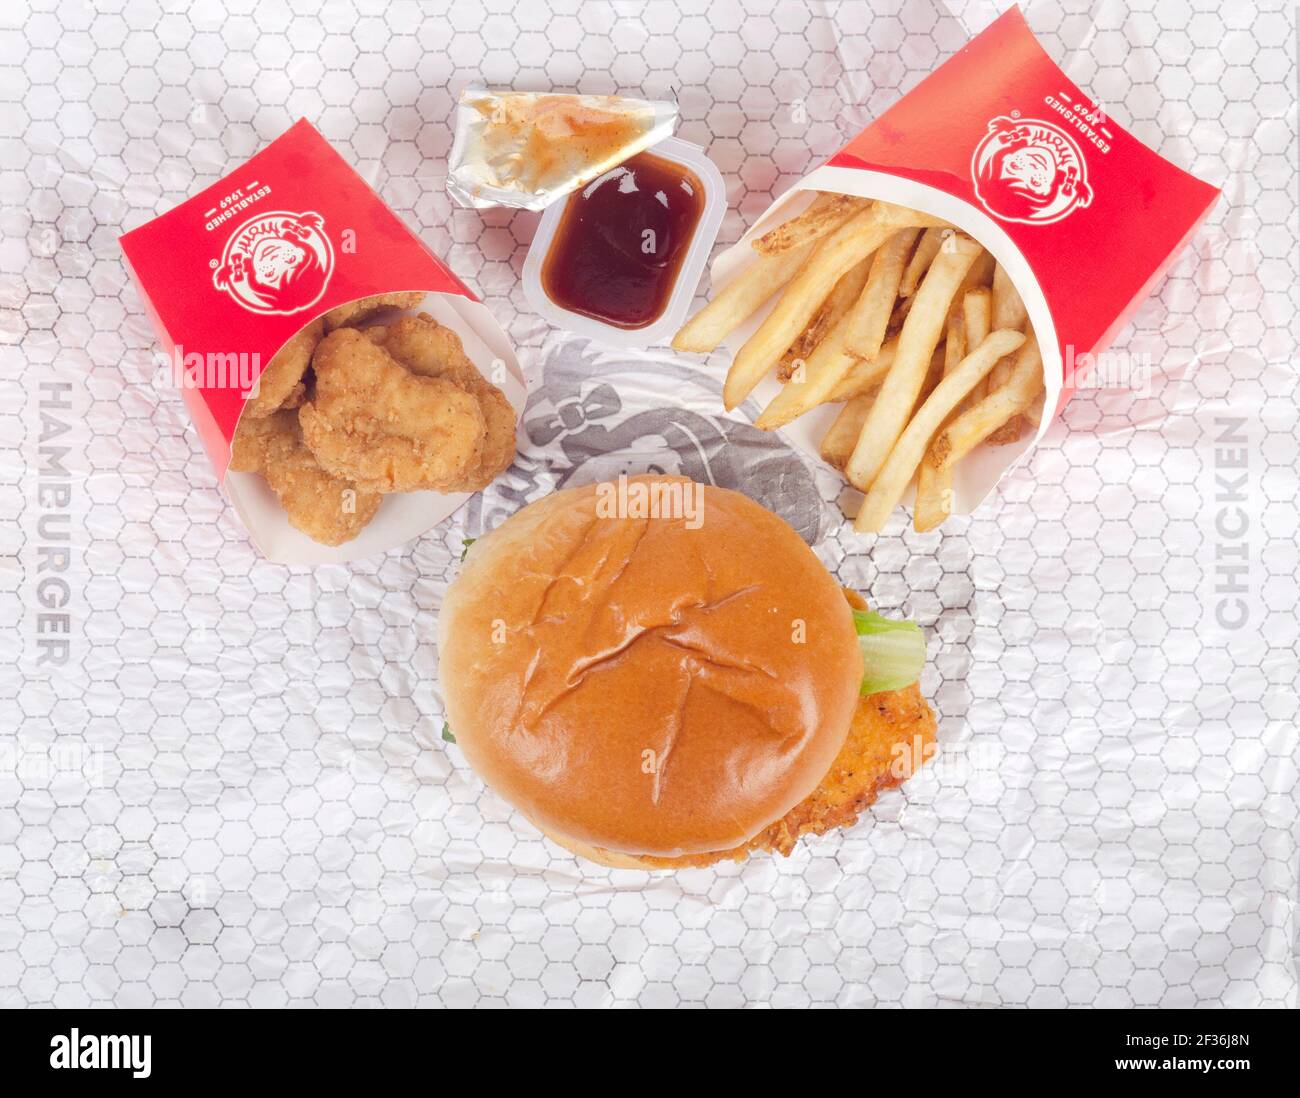 Wendy's Spicy Chicken Sandwich on Wrapper with Chicken Nuggets, BBQ Dipping Sauce & French Fries aka Chips Stock Photo